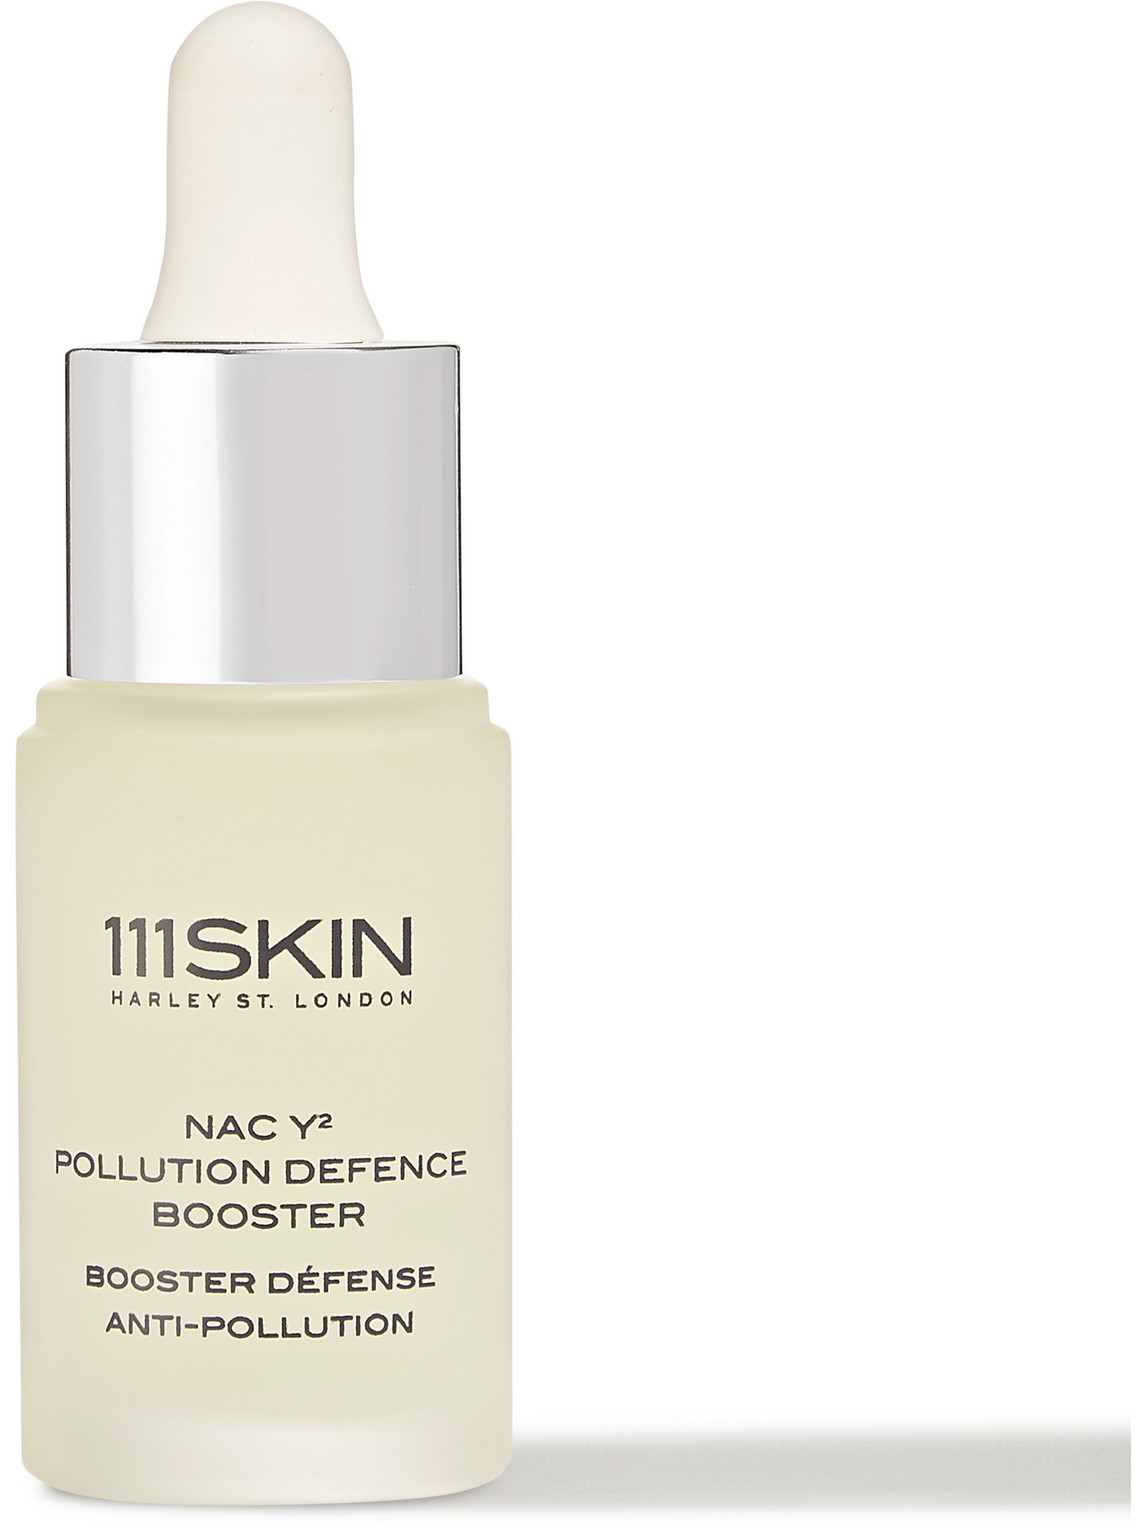 111skin Pollution Defence Booster, 20ml In Colorless